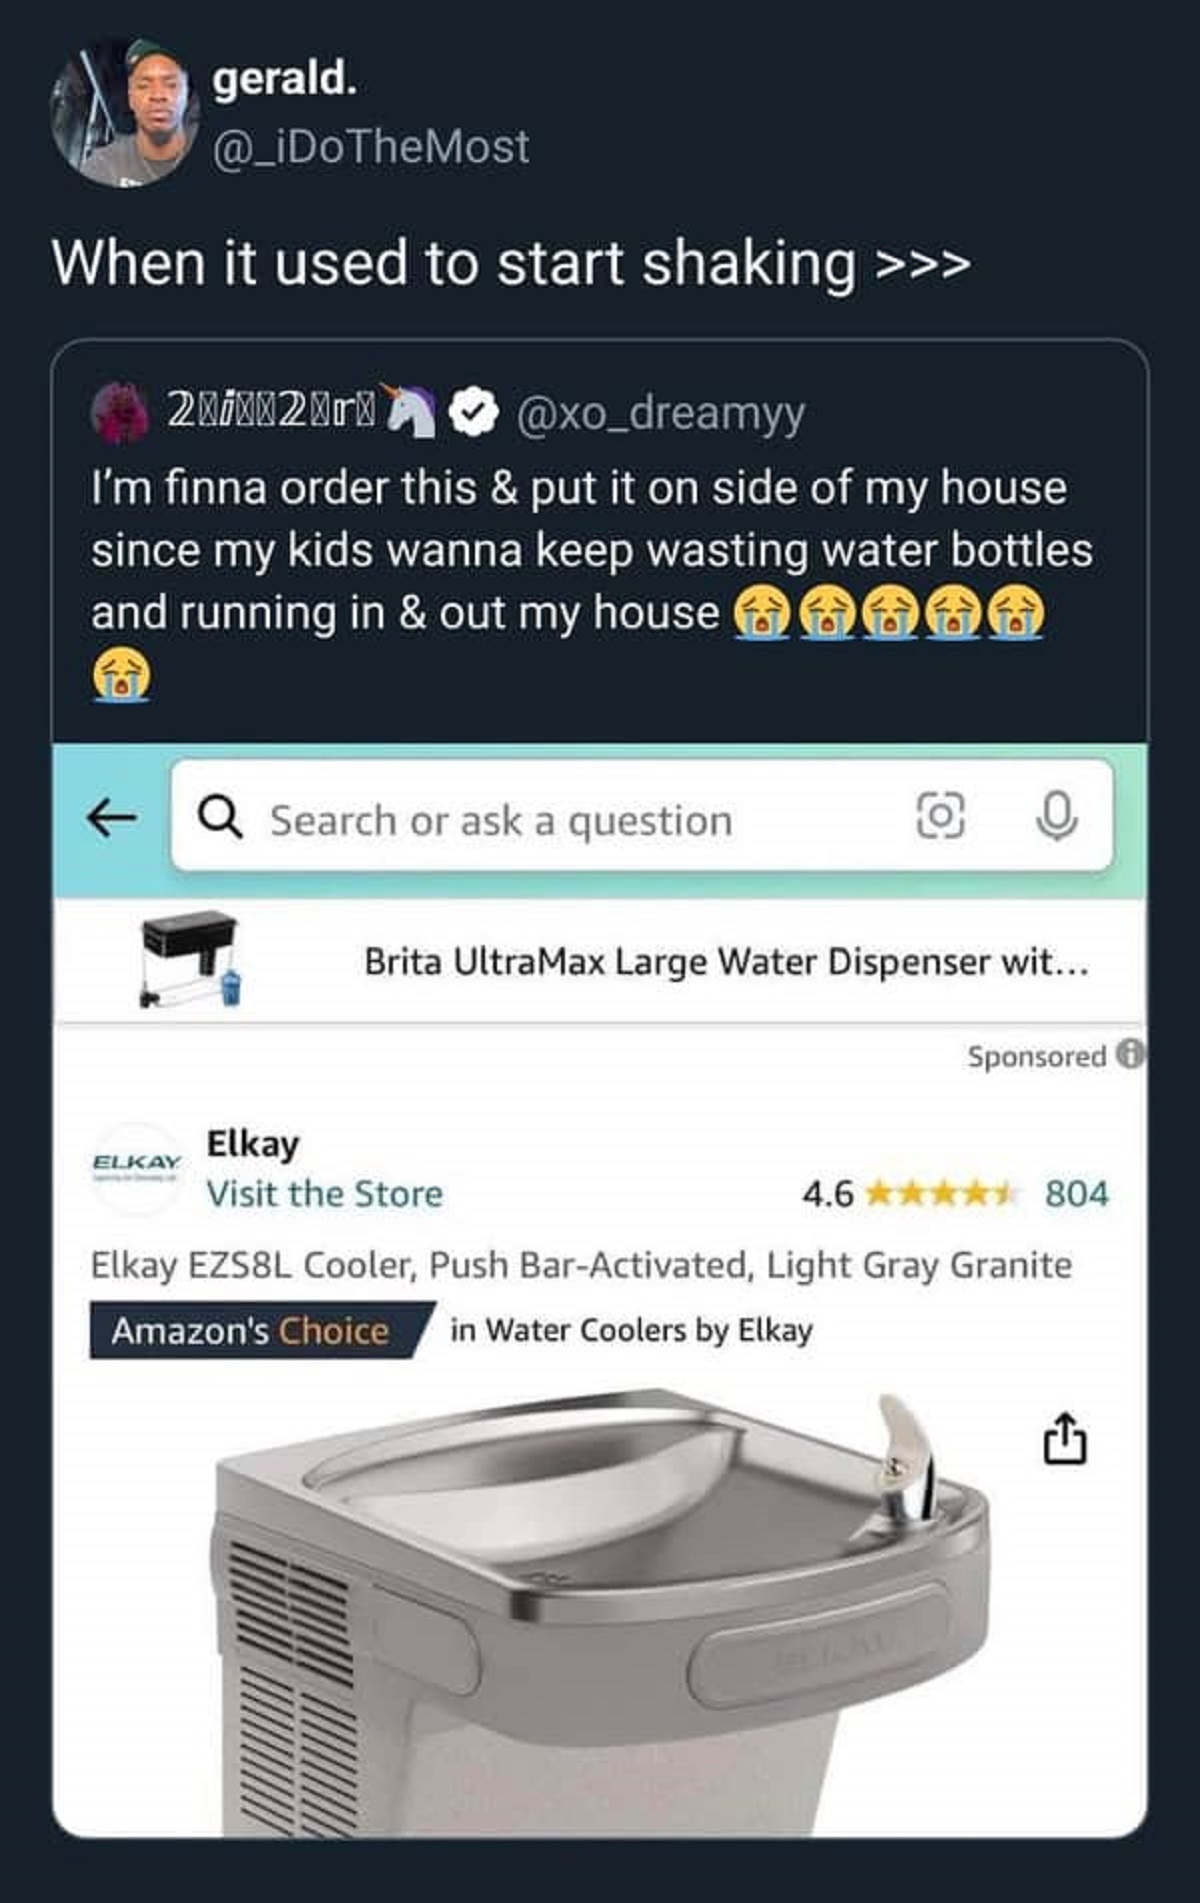 screenshot - gerald. When it used to start shaking >>> 2|i||2\r\ I'm finna order this & put it on side of my house since my kids wanna keep wasting water bottles and running in & out my house 66 Q Search or ask a question 9 Elkay Brita UltraMax Large Wate